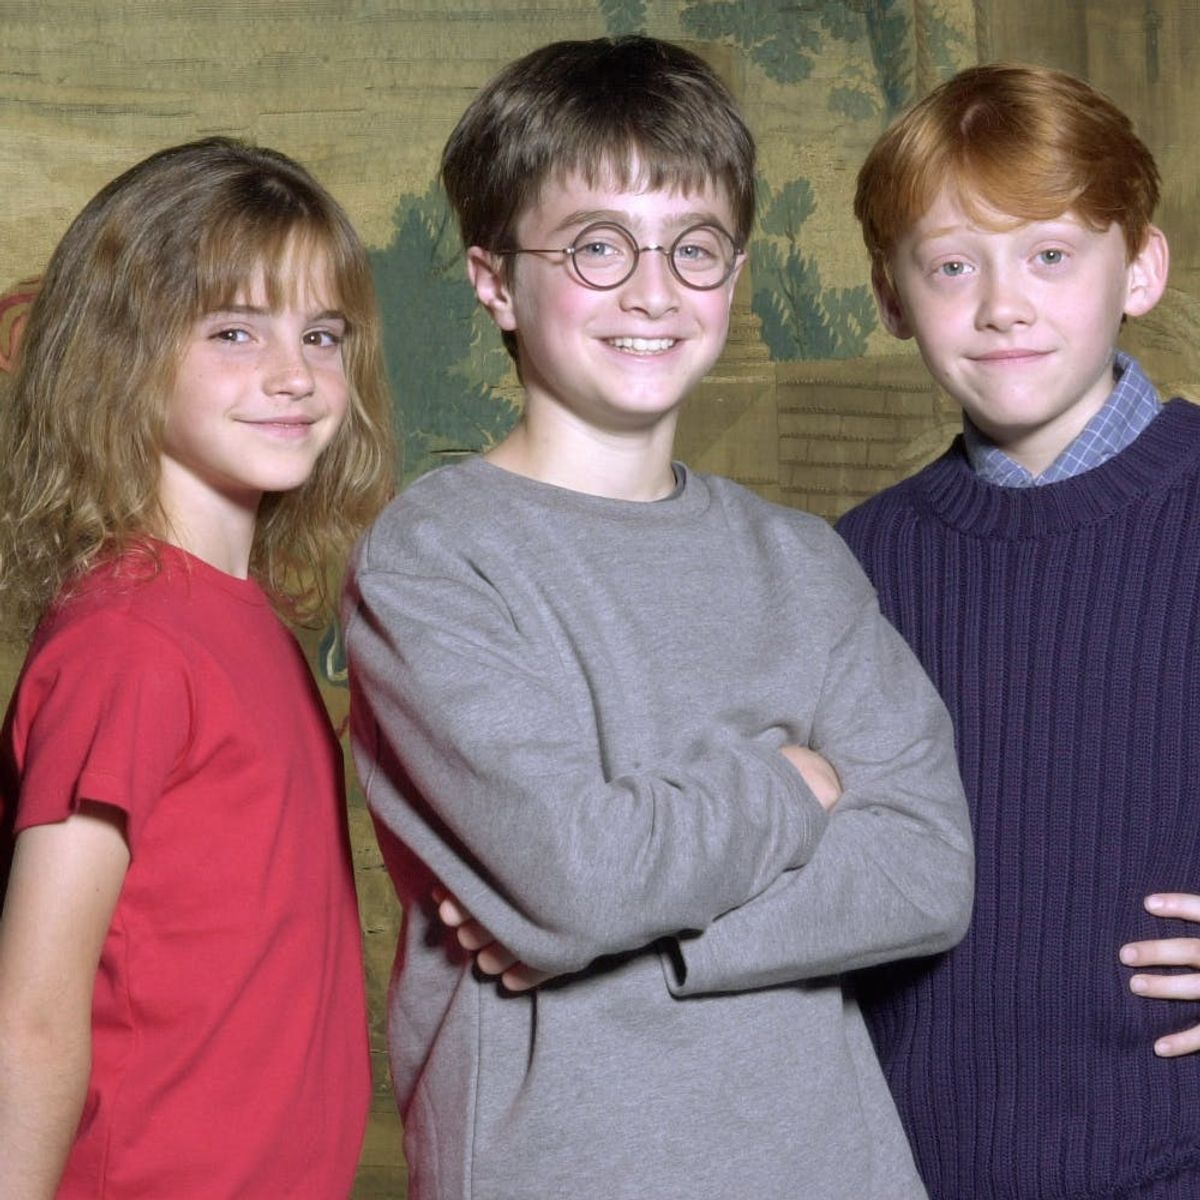 Potter Fans: Here’s the First Look at the Grown-Up Ron and Hermione